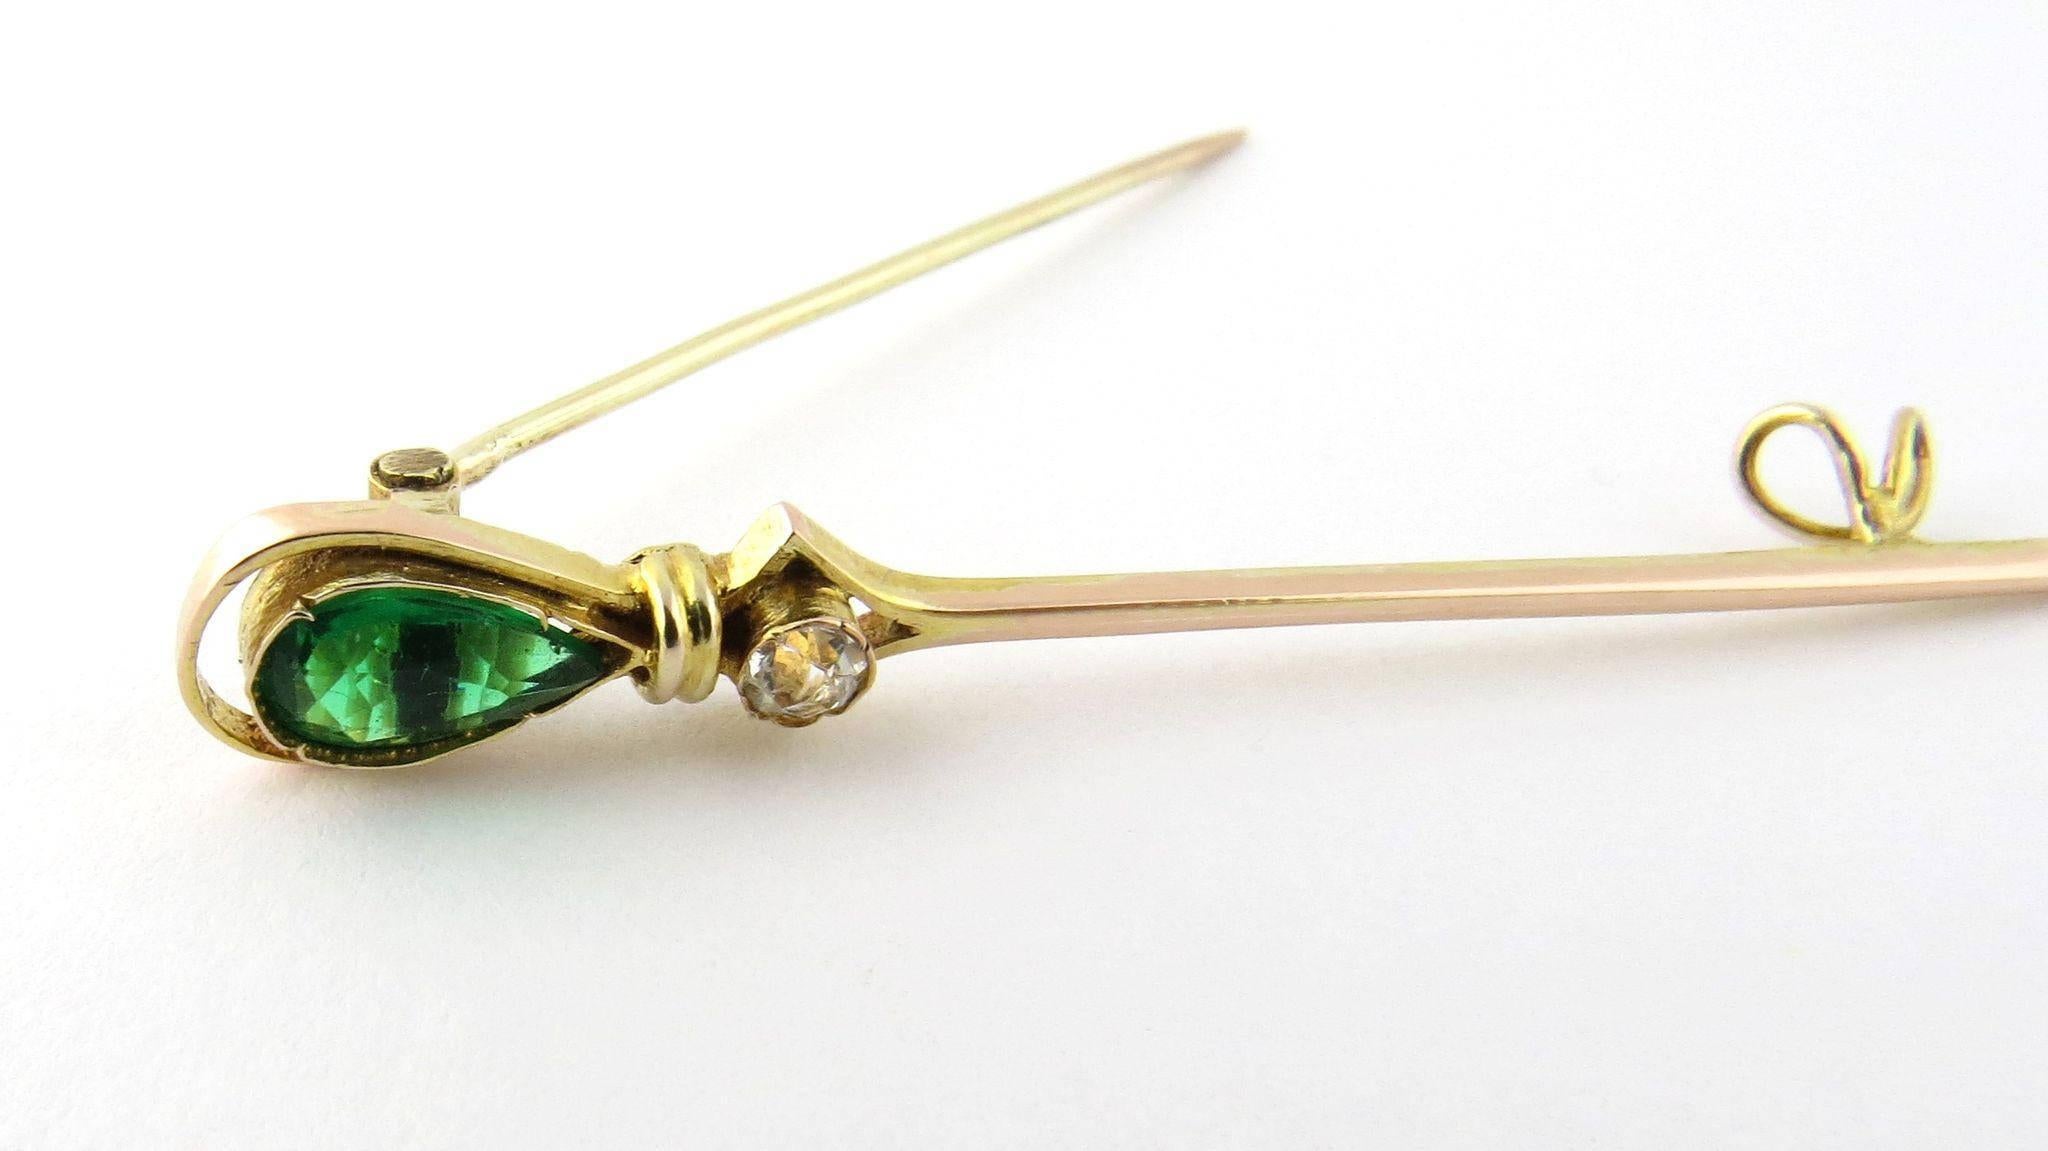 Women's Antique 10 Karat Yellow Gold Pin with Emerald and White Sapphire